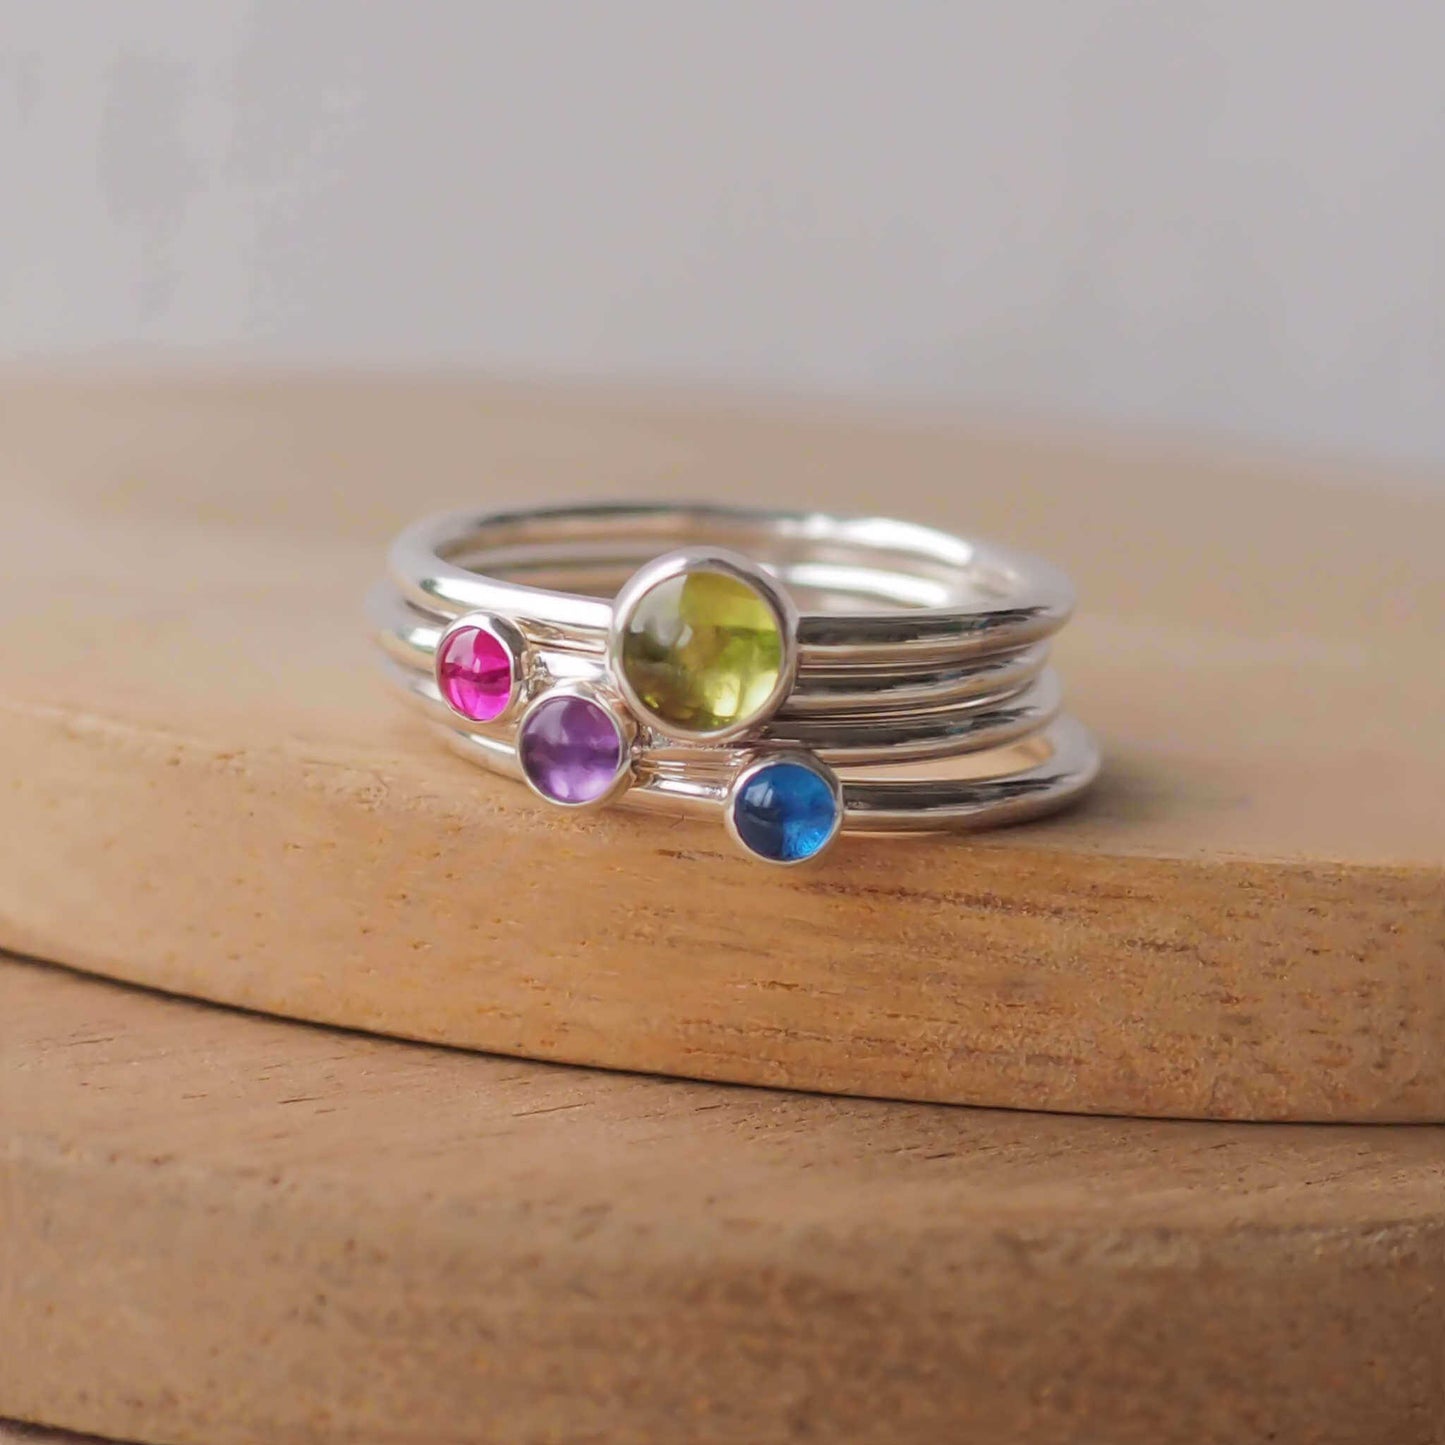 Four rings in Sterling Silver and mixed gemstones. The rings are minimalist in style with no decoration and feature a single simple round cabochon in a large 5mm Moss Green Peridot, smaller 3mm pink Lab Ruby, Purple Amethyst, and bright Blue Lab Sapphire. Handmade in Scotland by maram jewellery